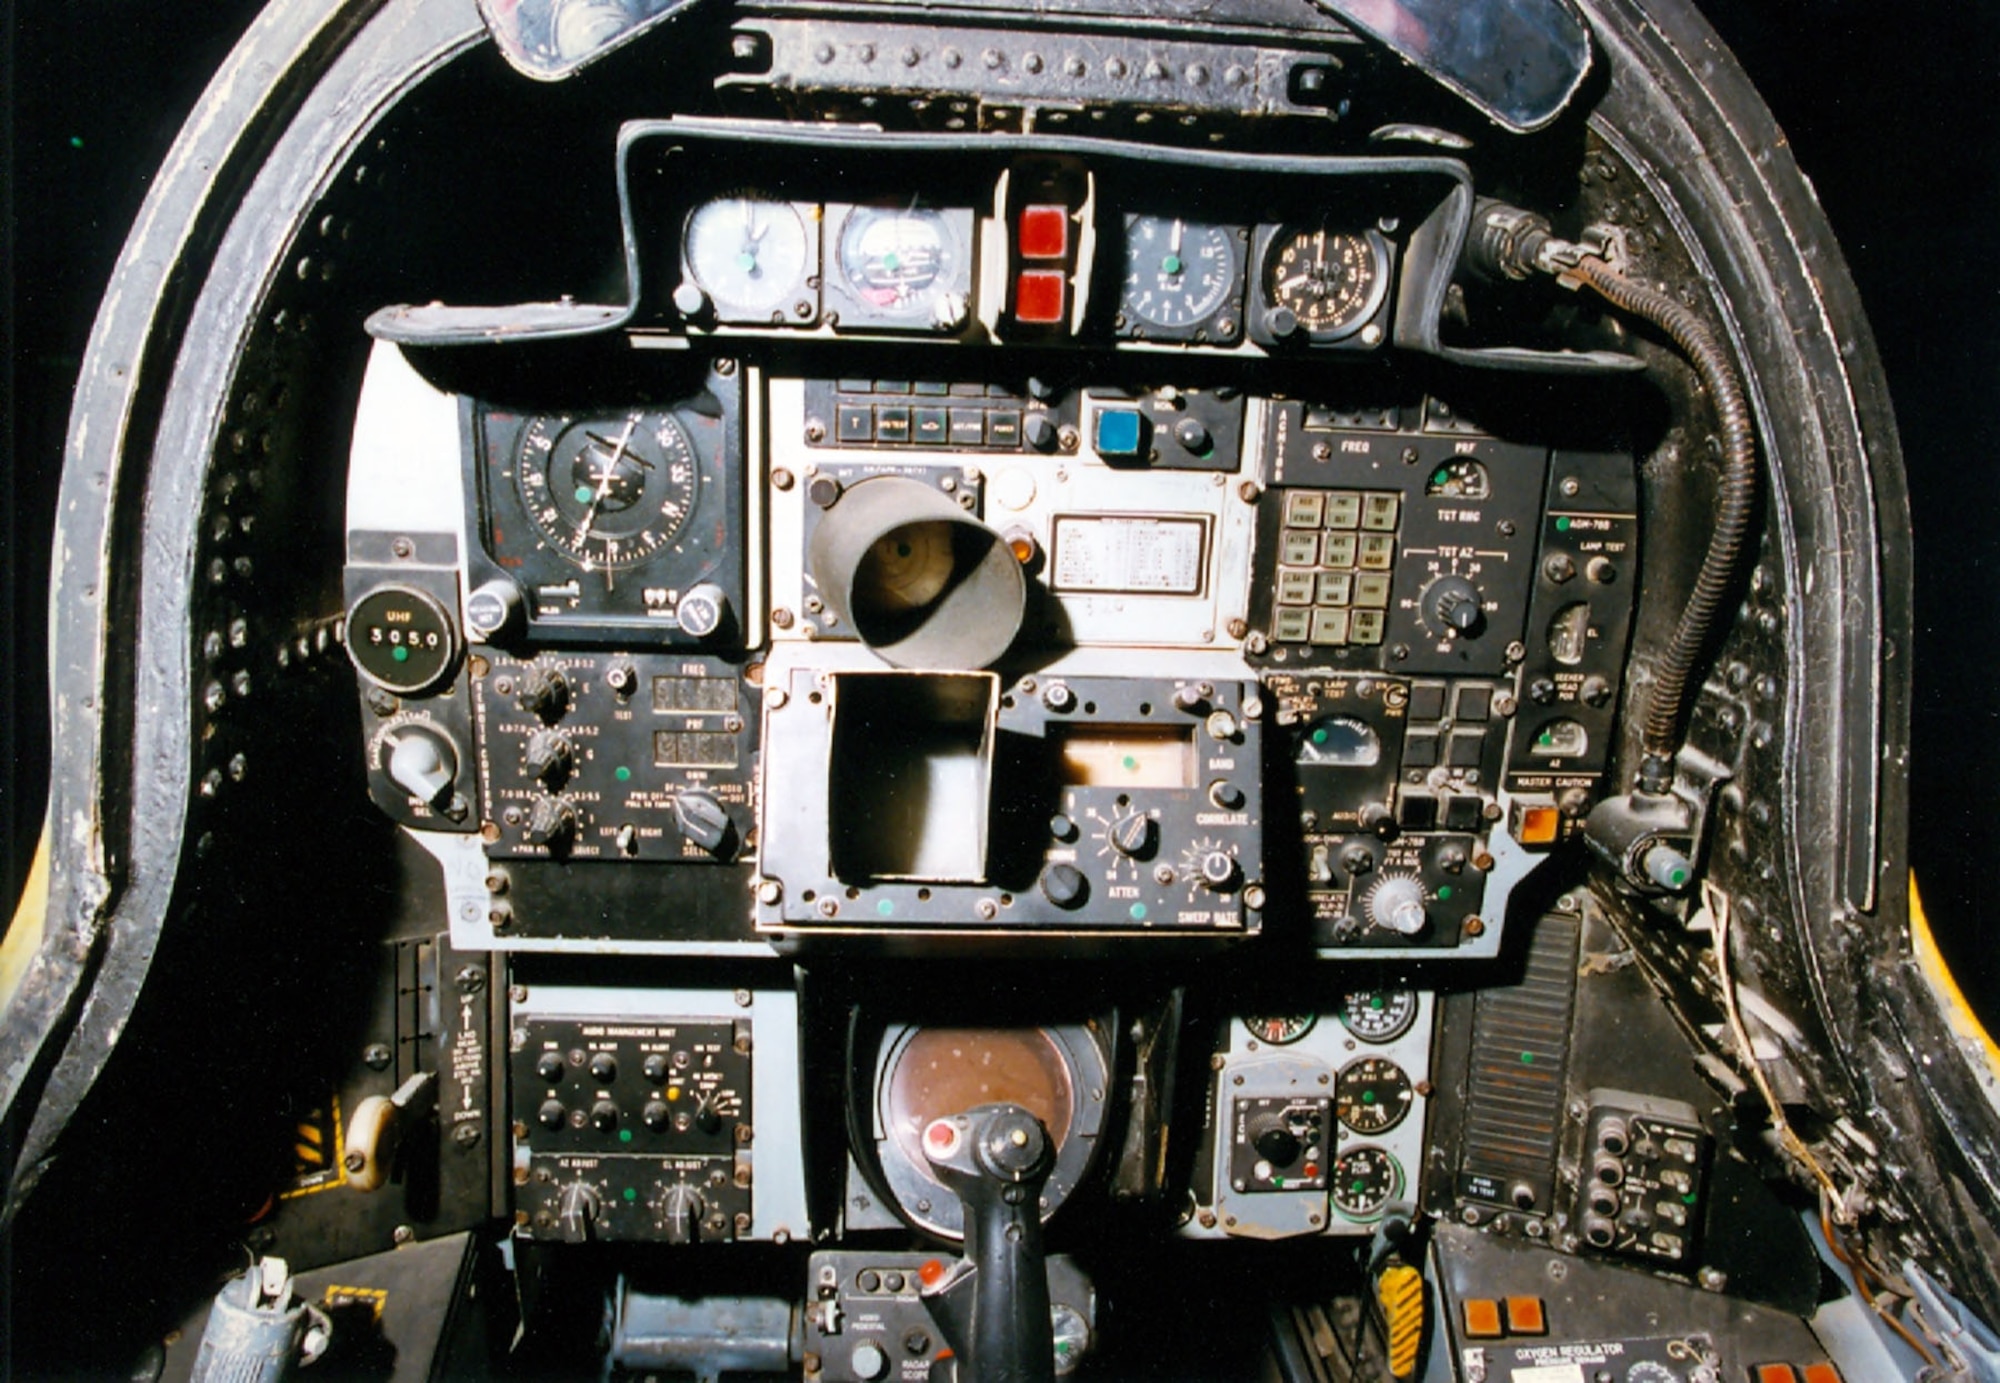 DAYTON, Ohio -- Republic F-105G cockpit at the National Museum of the United States Air Force. (U.S. Air Force photo)